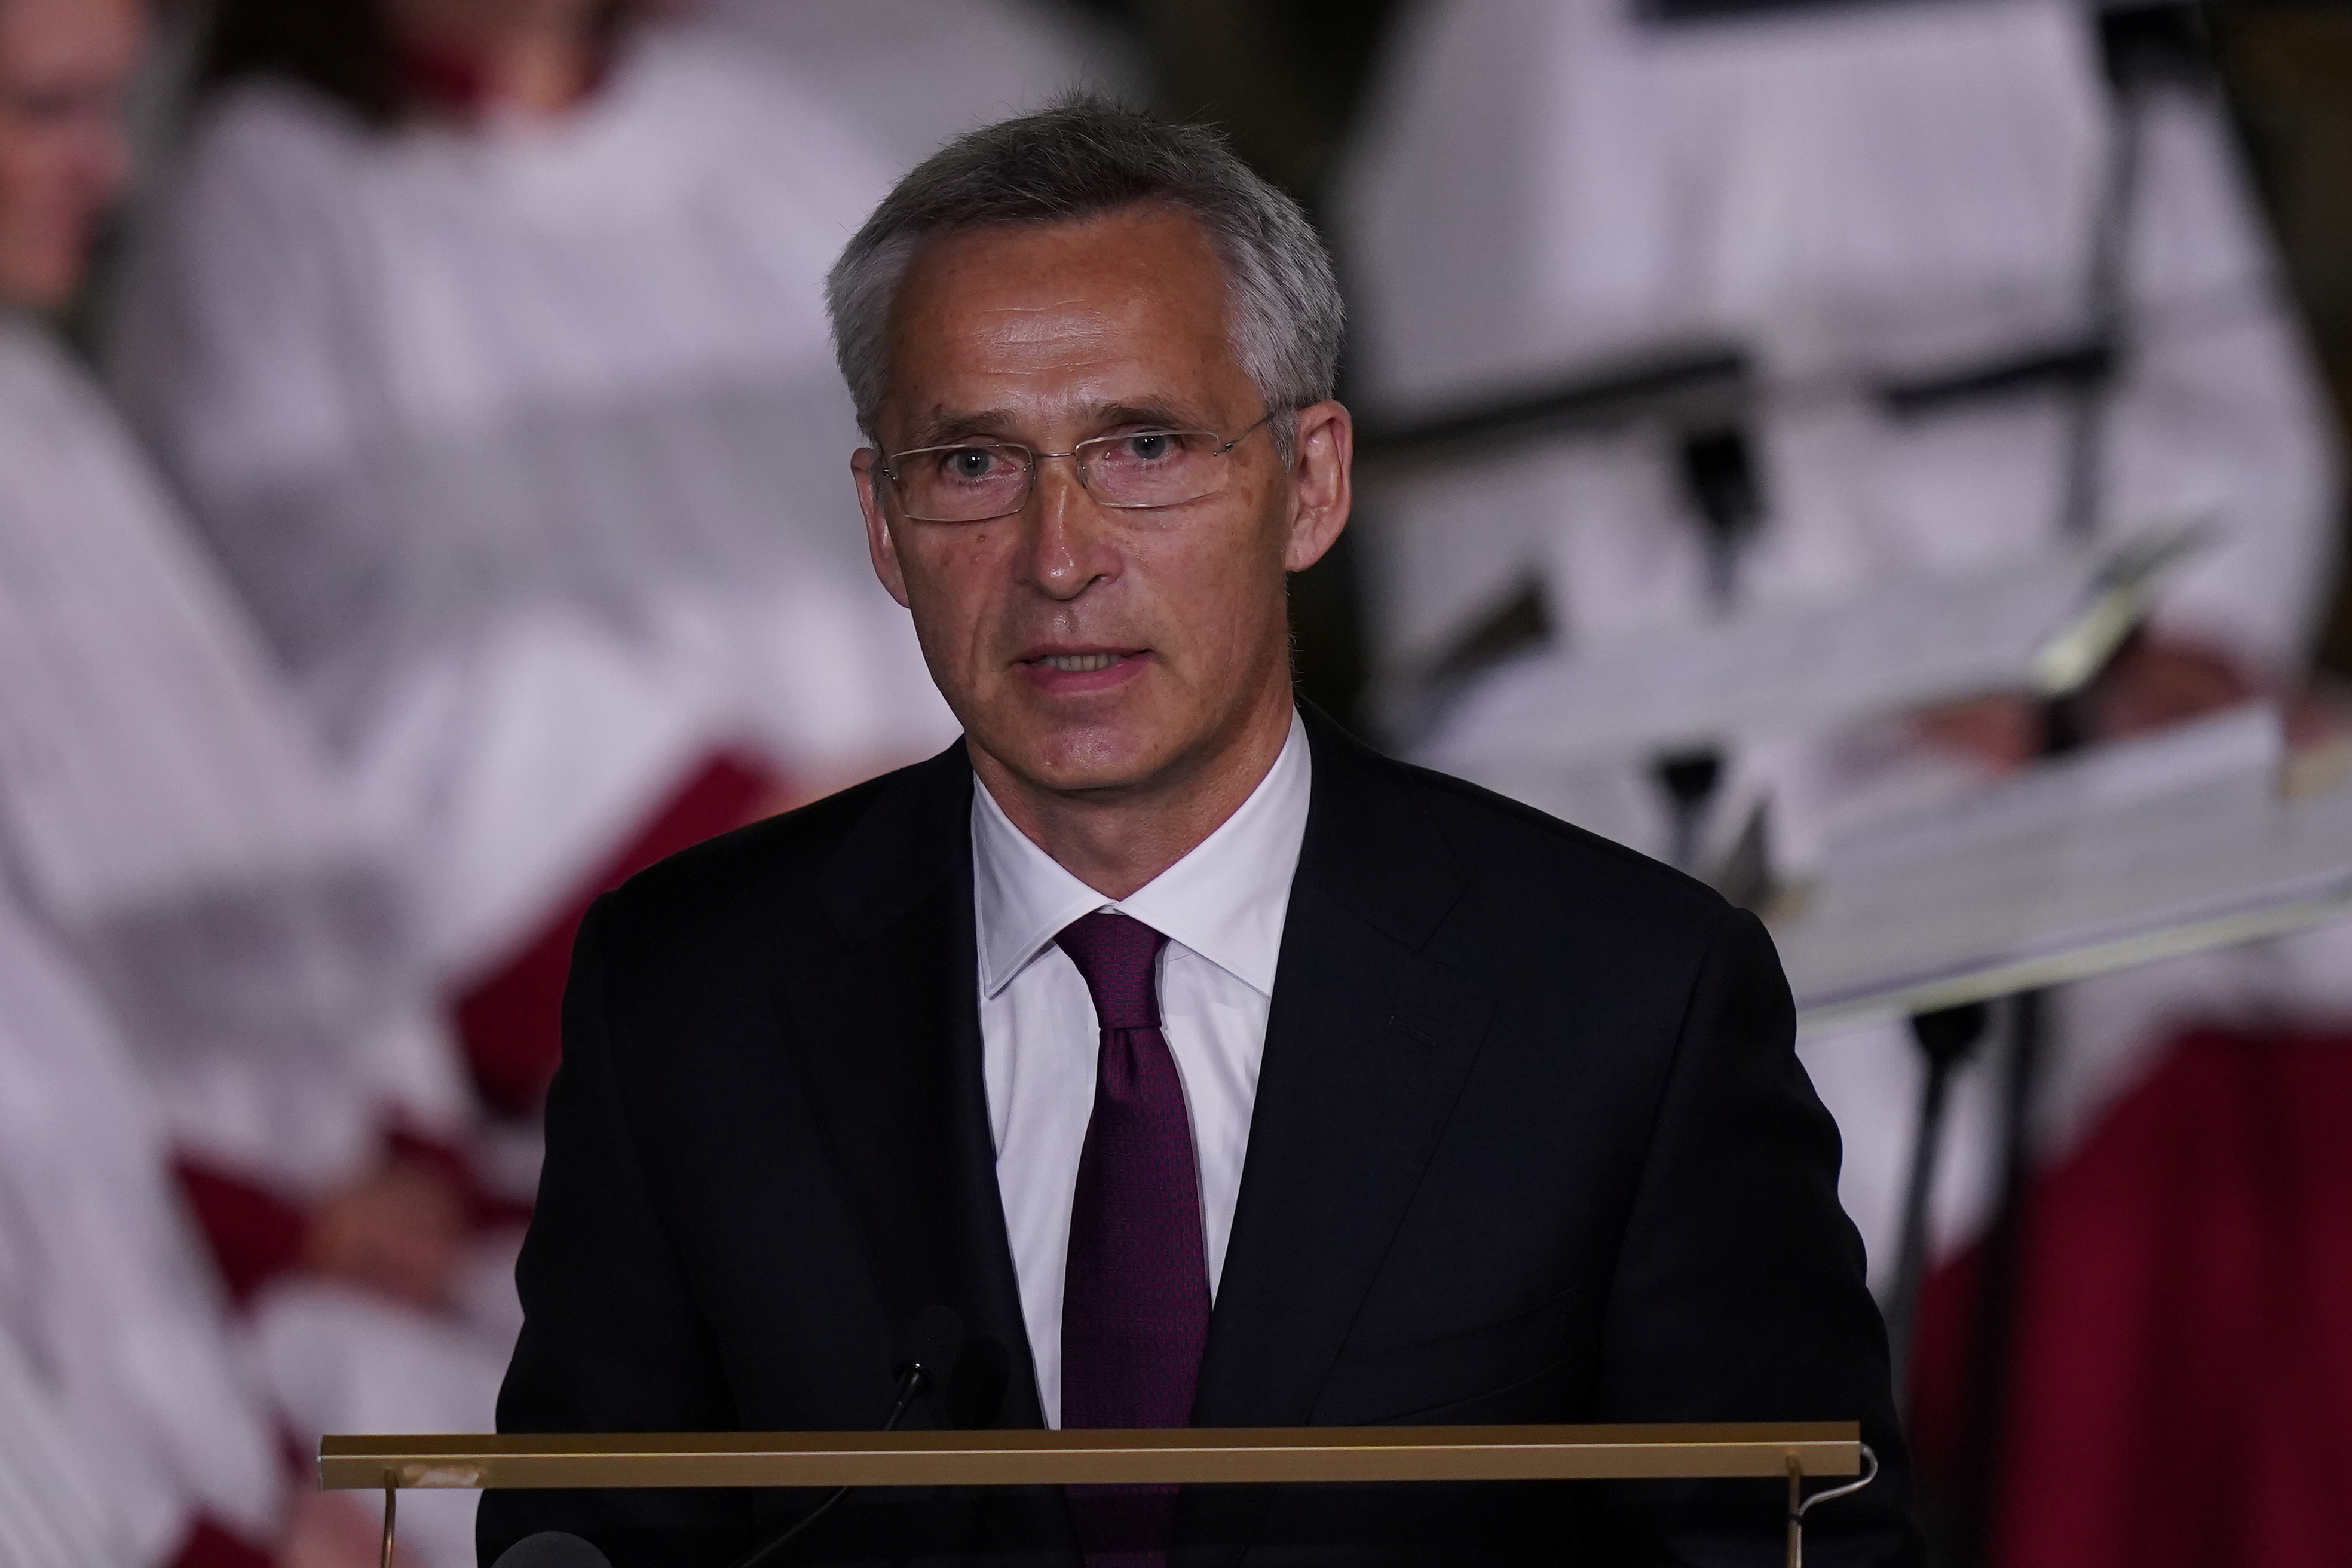 NATO Secretary General Jens Stoltenberg gives a speech during a memorial service at the Oslo Cathedral ten years after the Oslo and Utoeya island bomb attack, in Oslo, Norway, July 22, 2021. NTB/Torstein Boee/via REUTERS